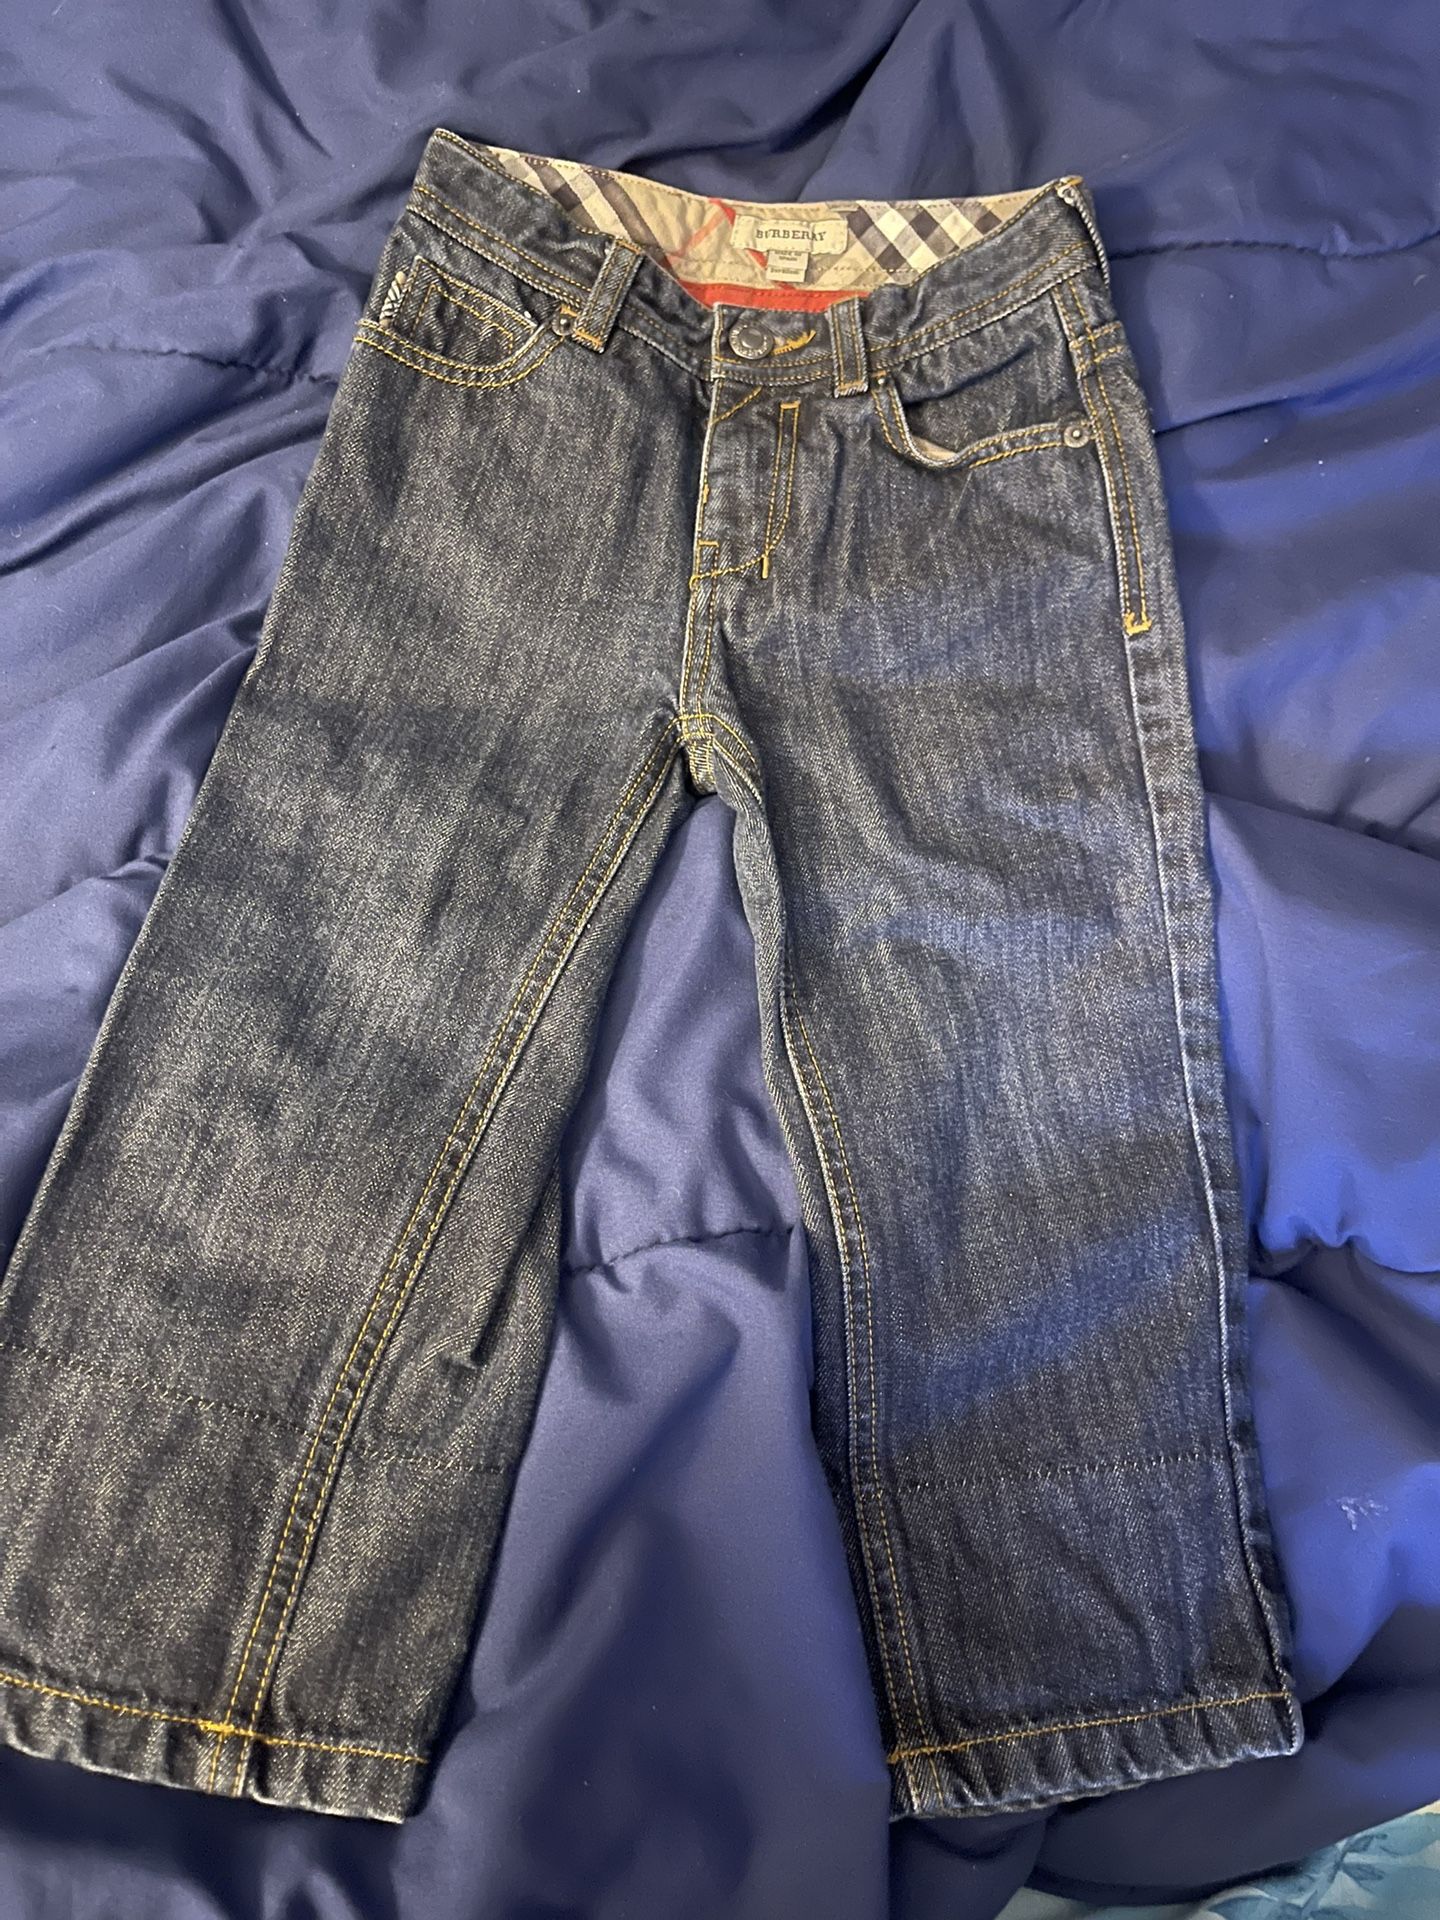 2 Pairs Toddler Boy Jeans Size 2T